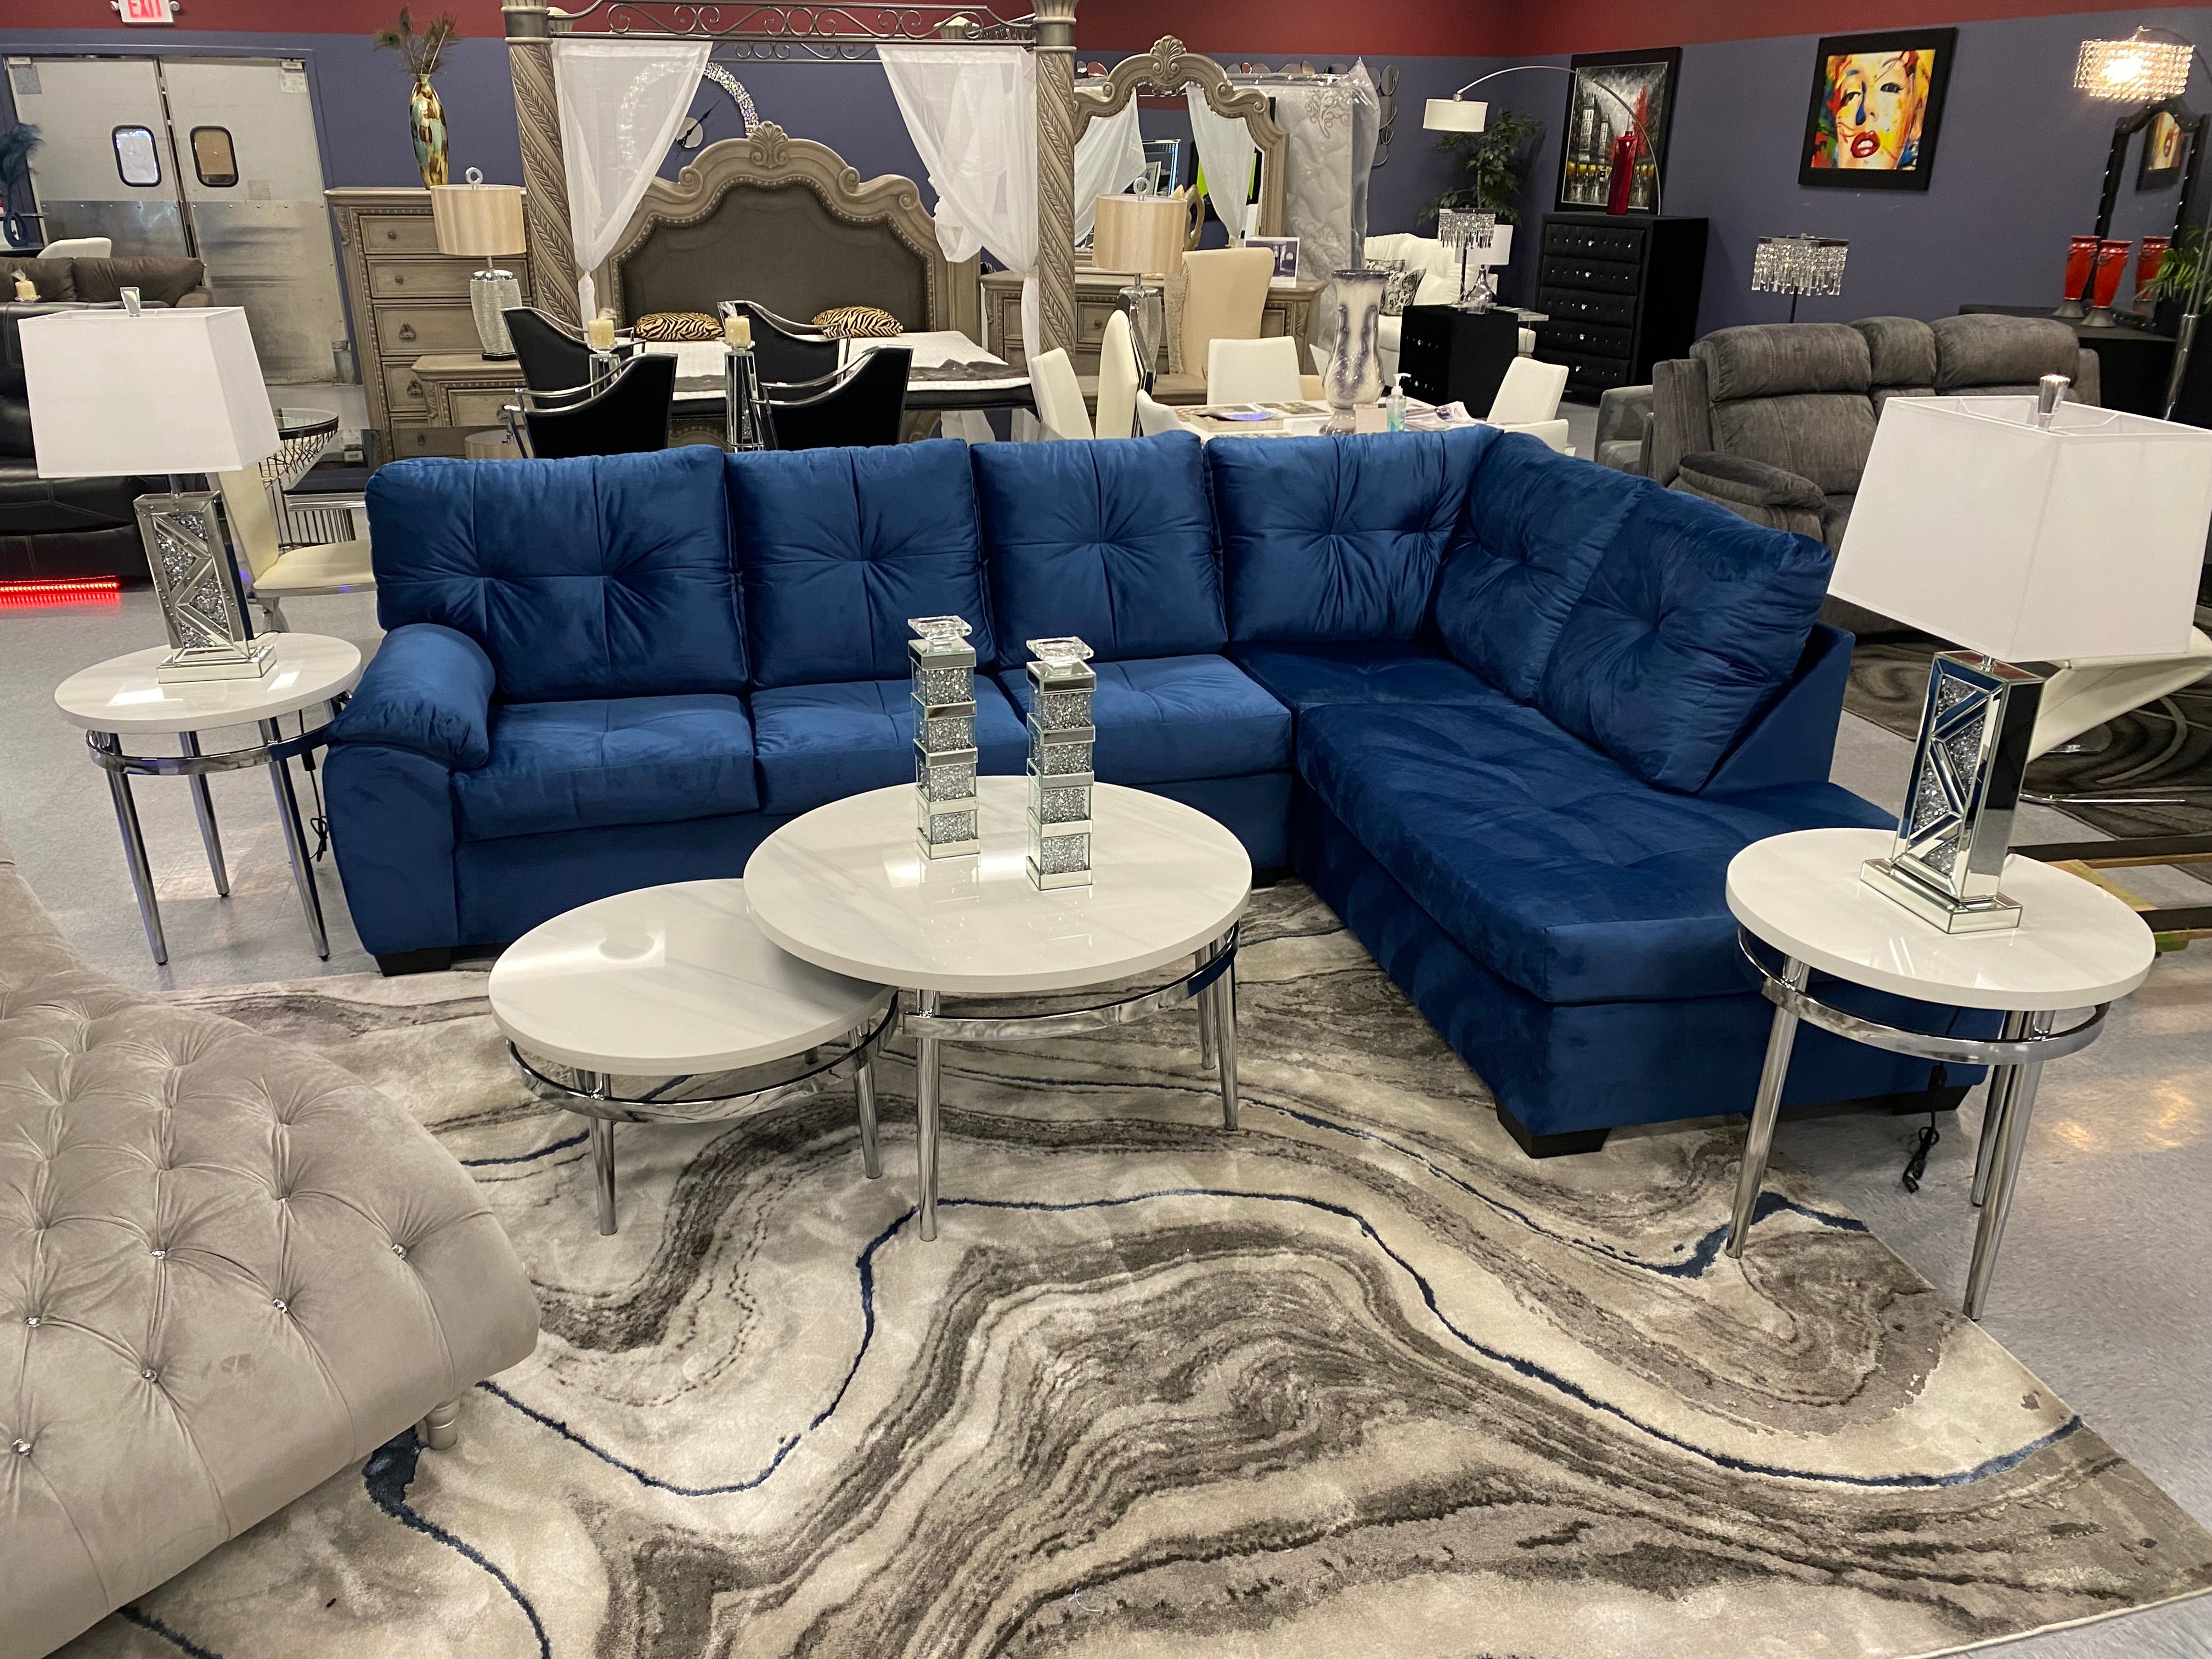 CRISTAL ROYALE Upholstered Sectional Sofa in Coastal Blue Premium Chanel Velvet Fabric ** Available In Over 500 in house Colors and Patterns to Choose From, ** Custom Made To Order ** Design It Your Way